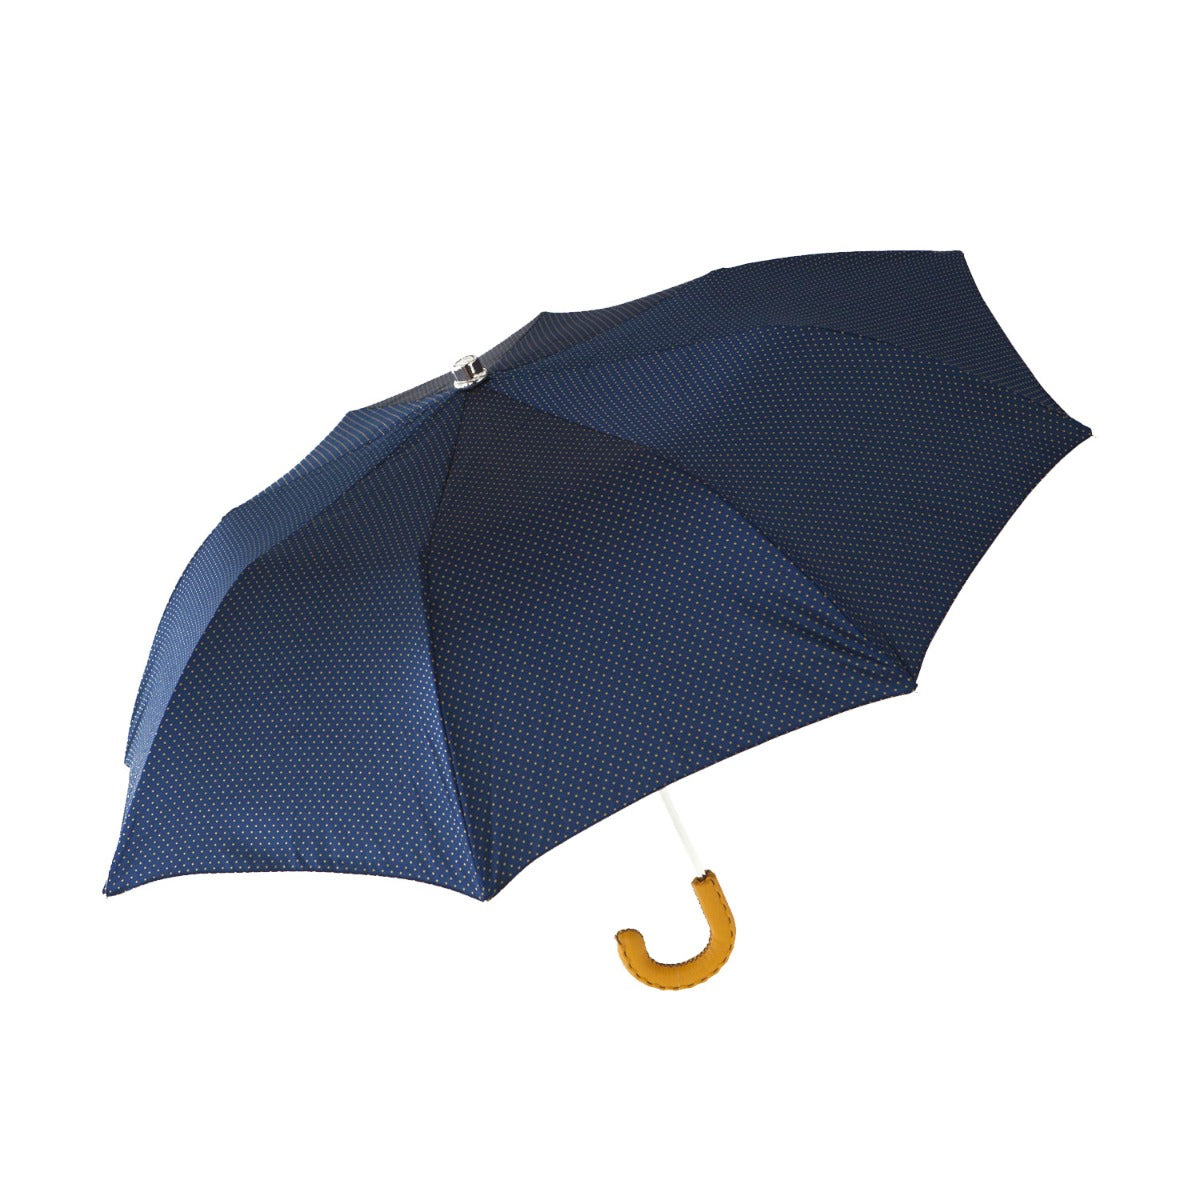 A Navy Yellow-Dot Travel umbrella with a Yellow Leather Handle from KirbyAllison.com.